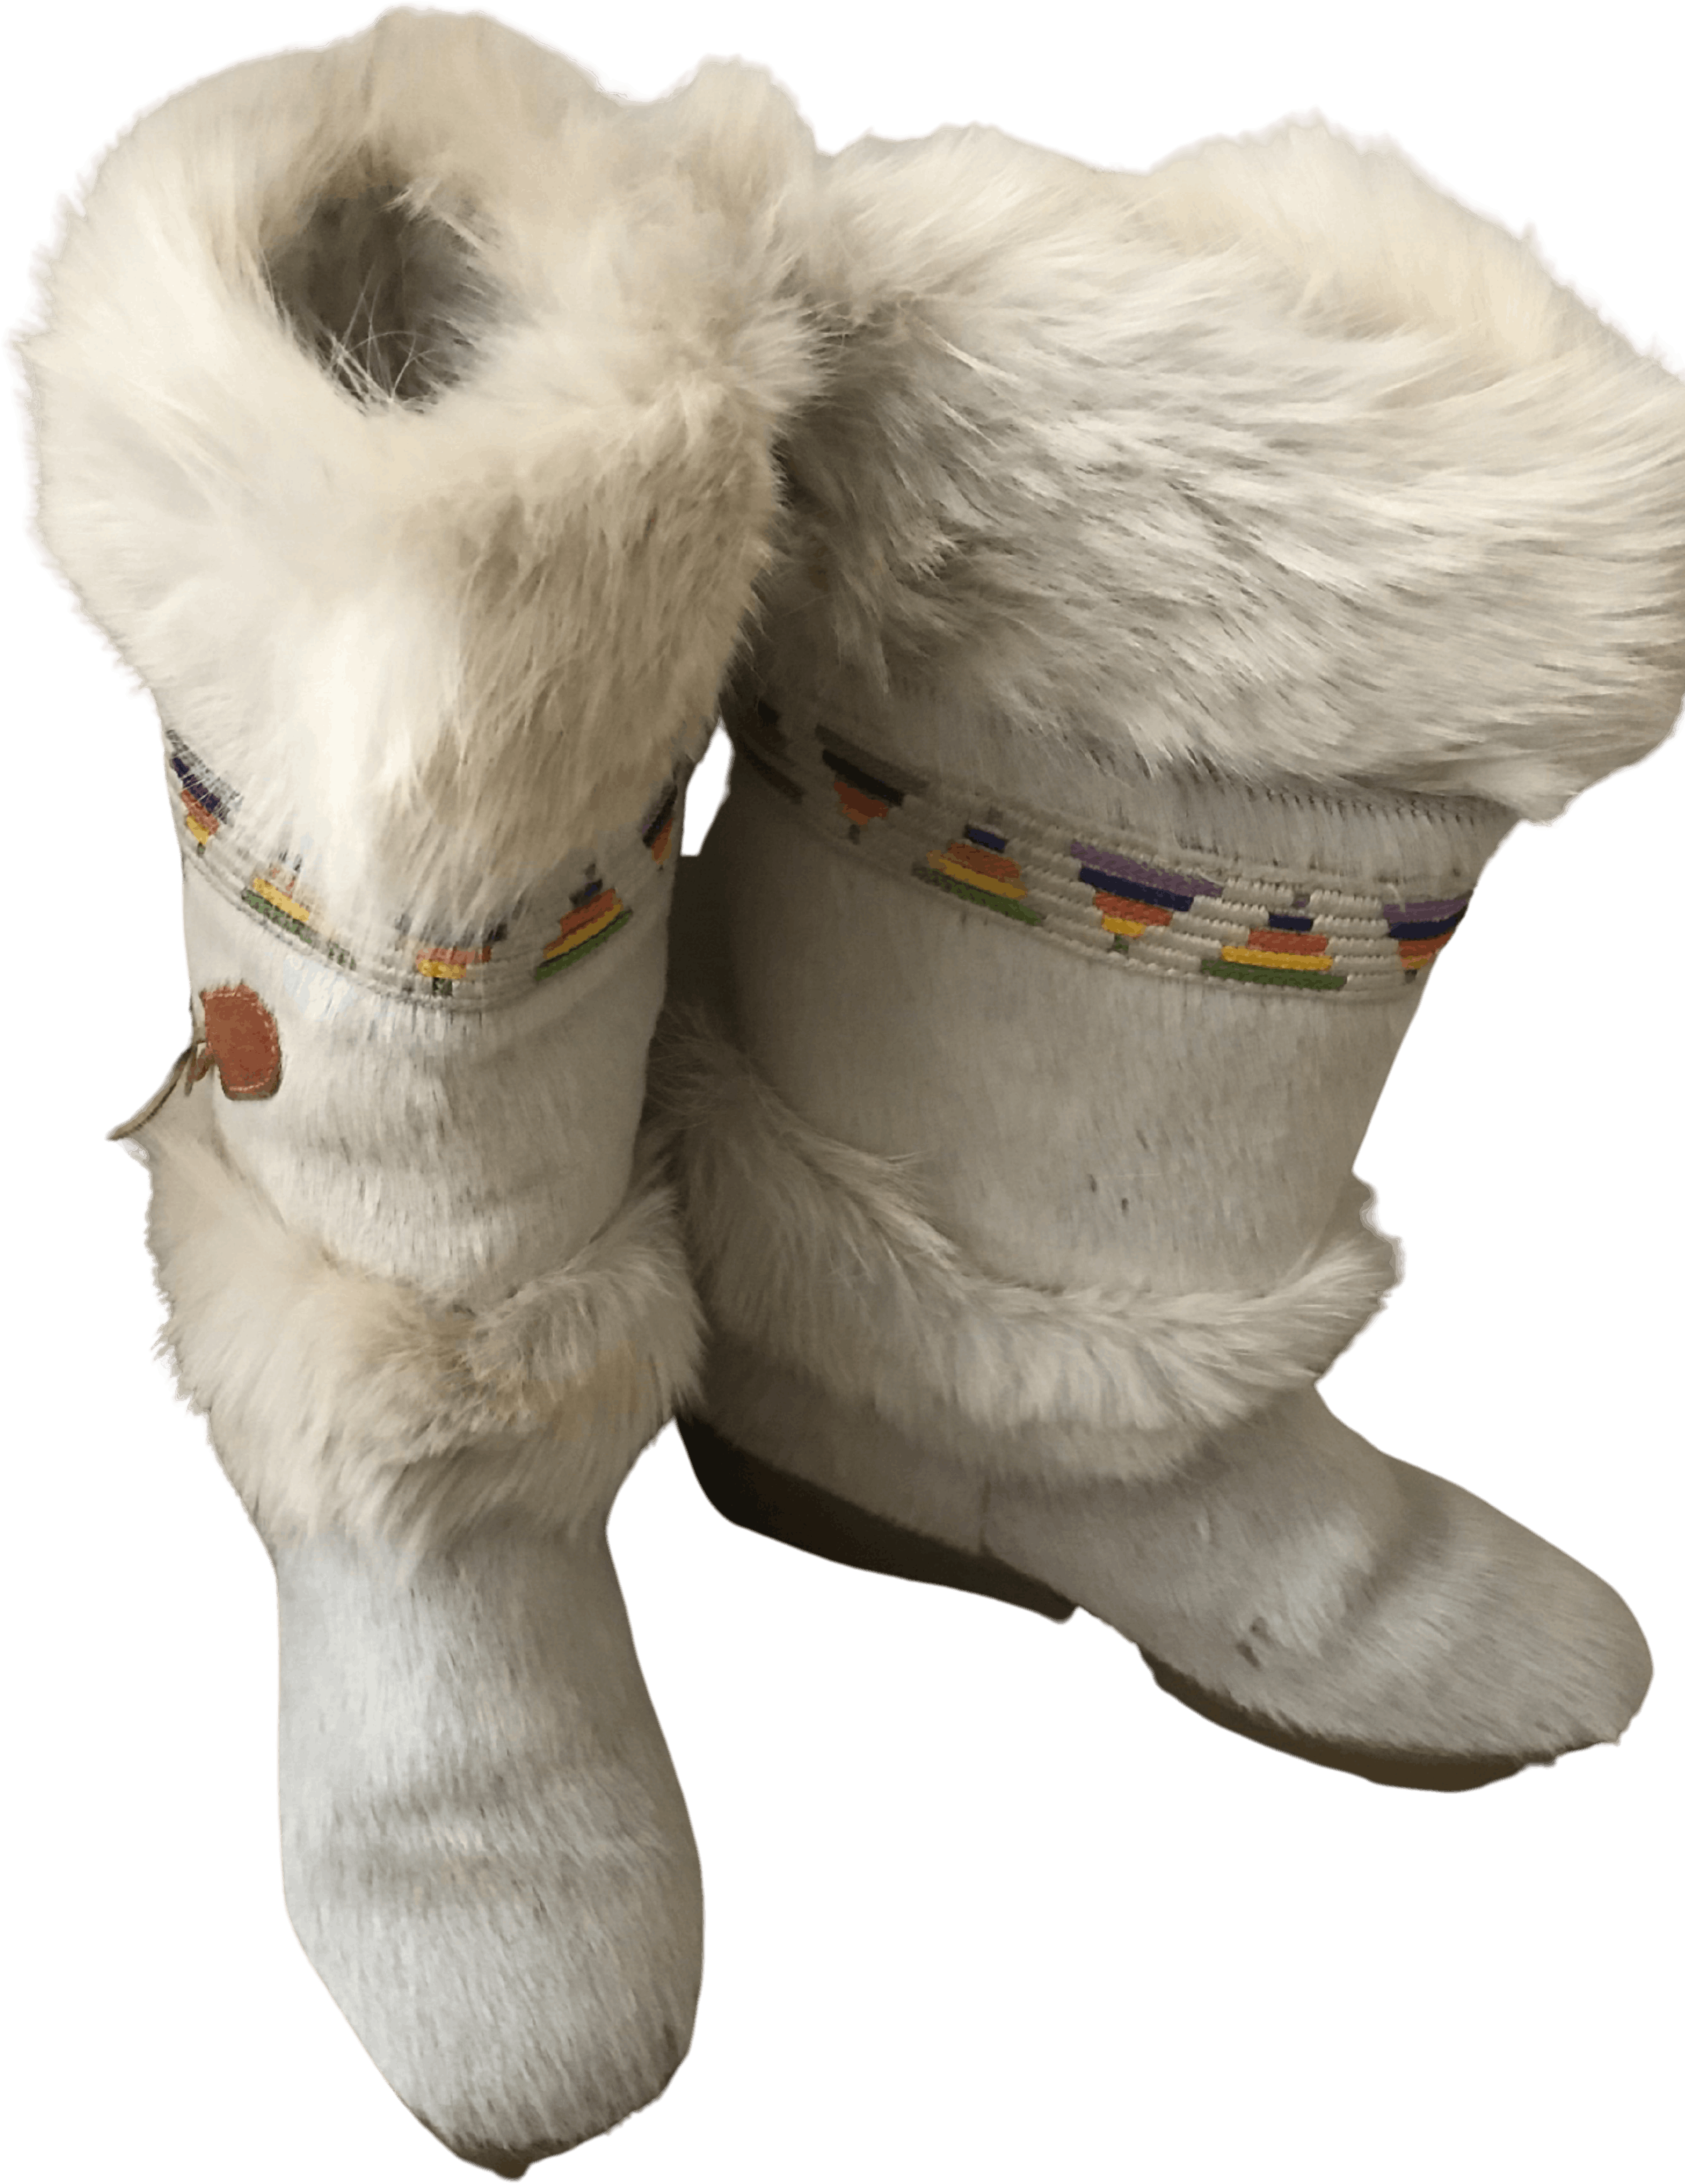 Vintage 70's/80's Goat Fur Boots with Printed Trim by Tecnica